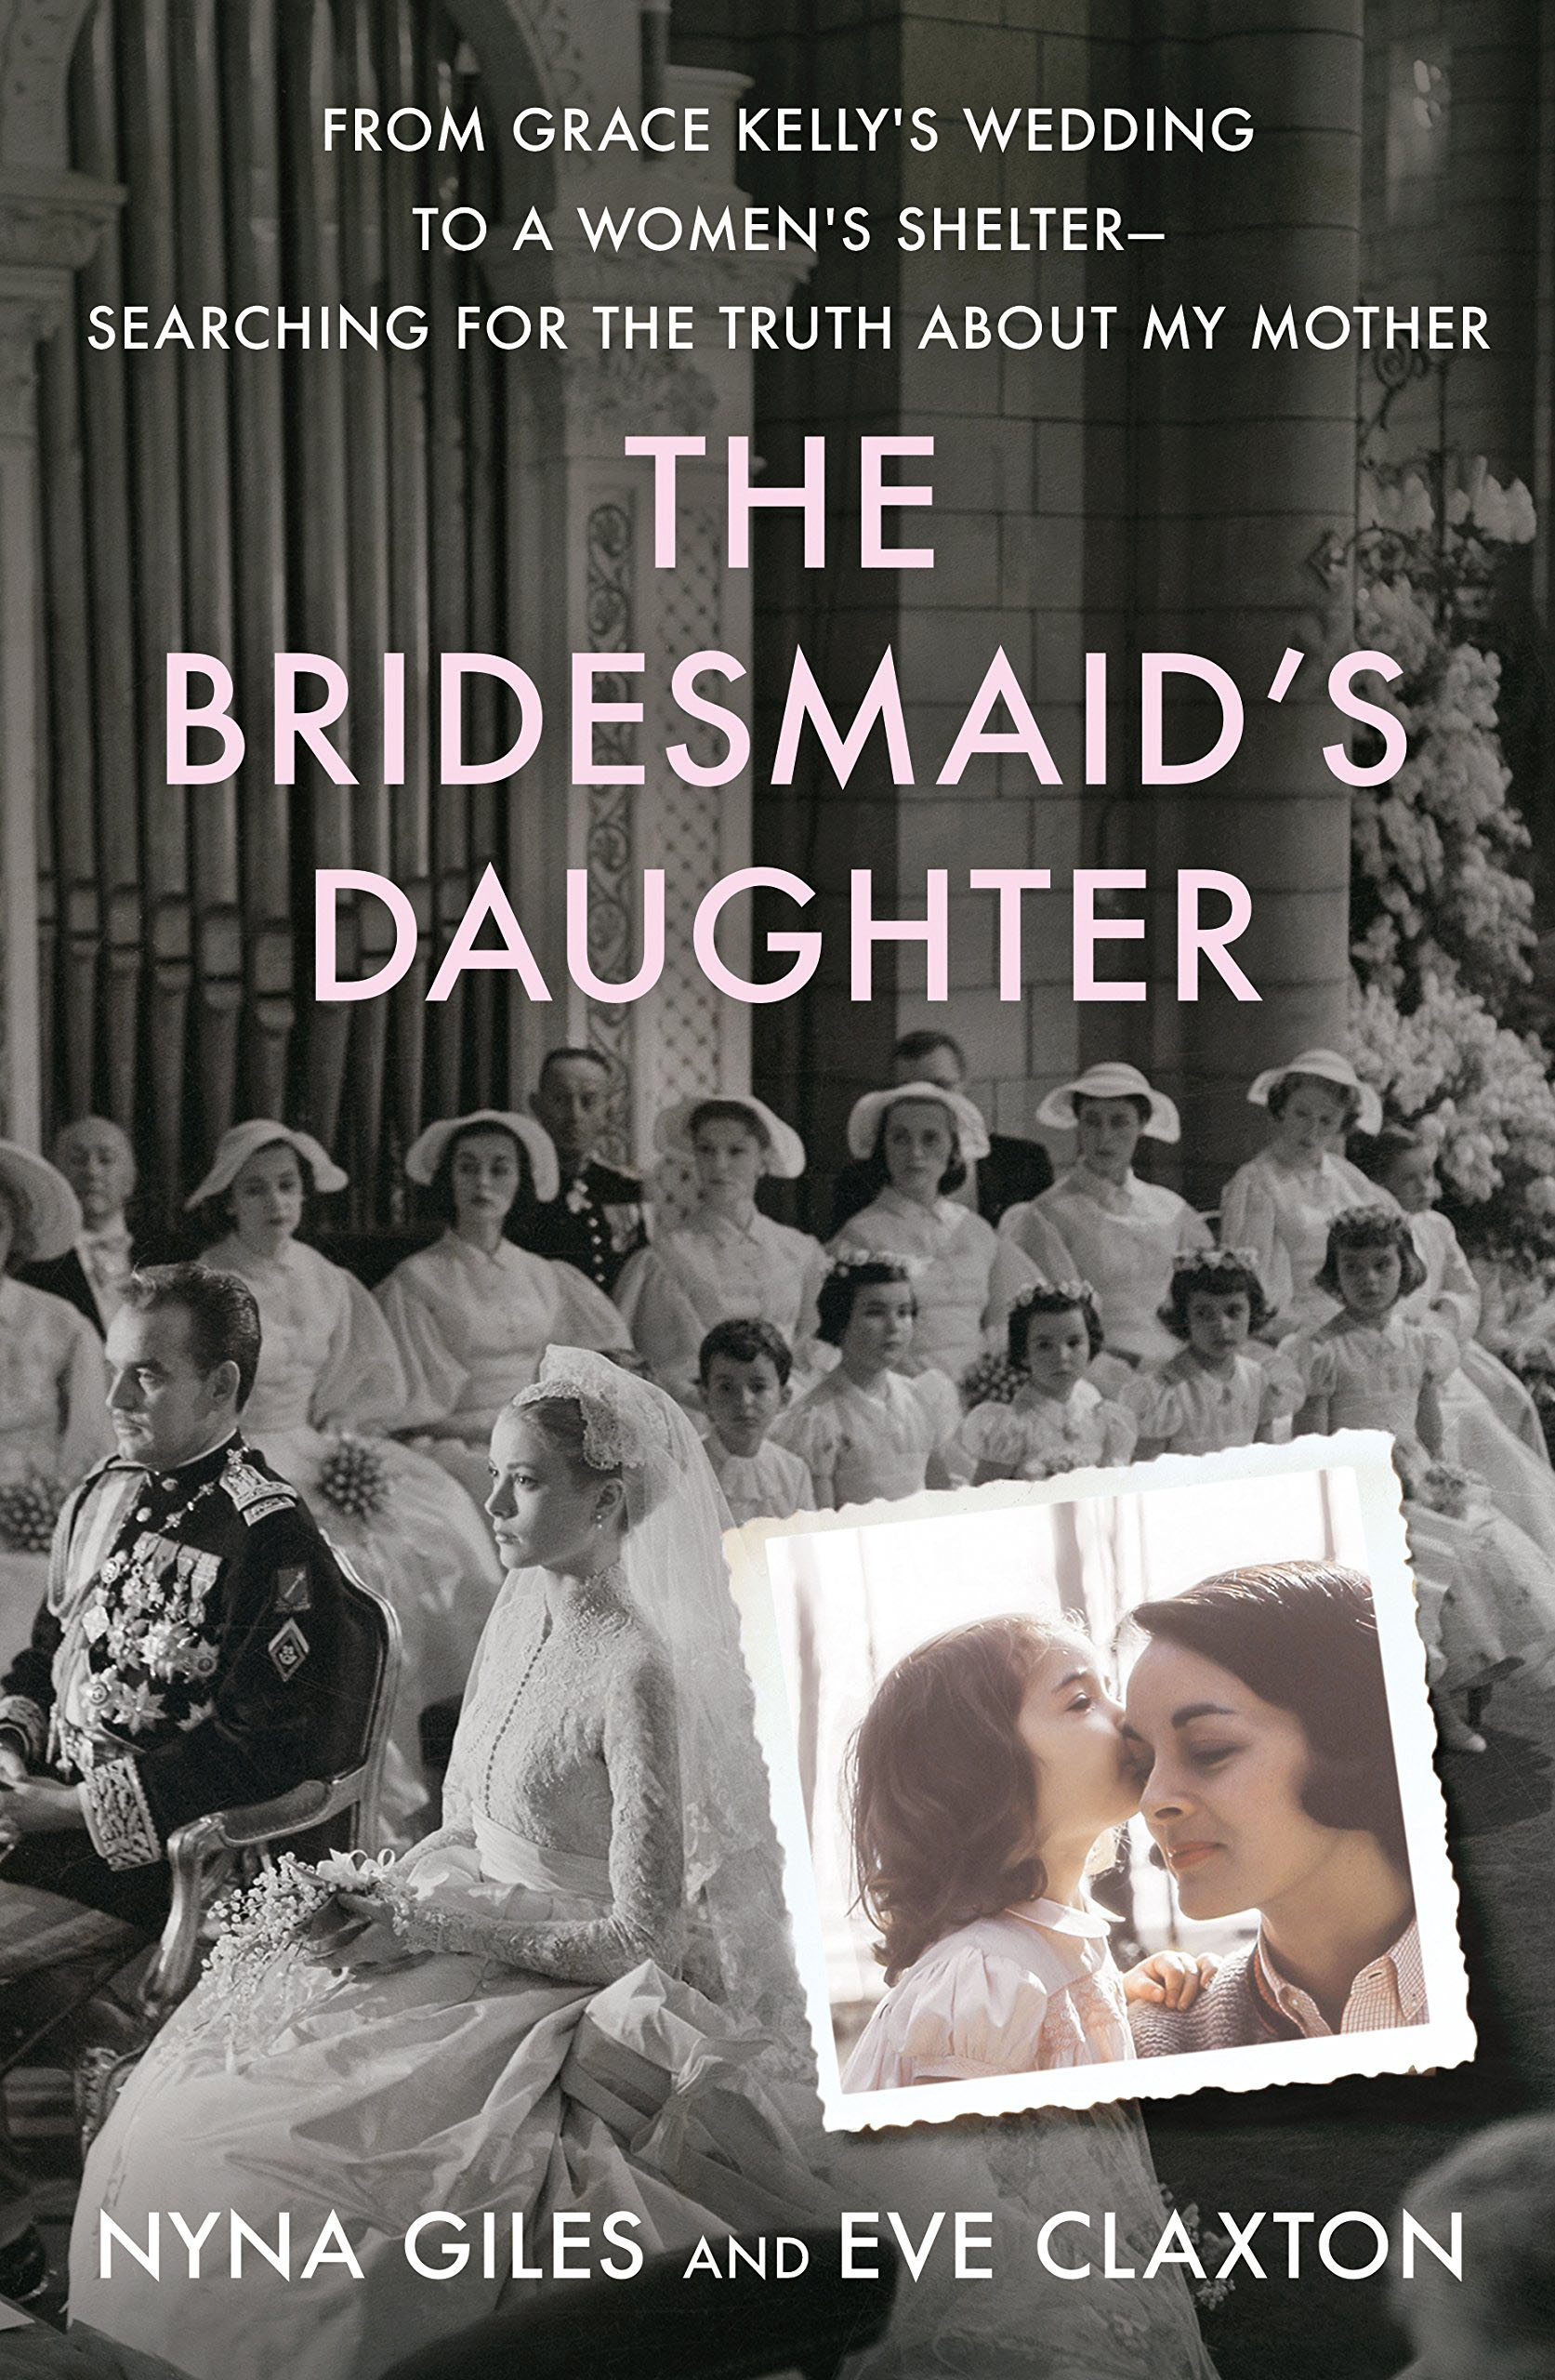 The Bridesmaid’s Daughter: From Grace Kelly’s Wedding to a Women’s Shelter – Searching for the Truth About My Mother